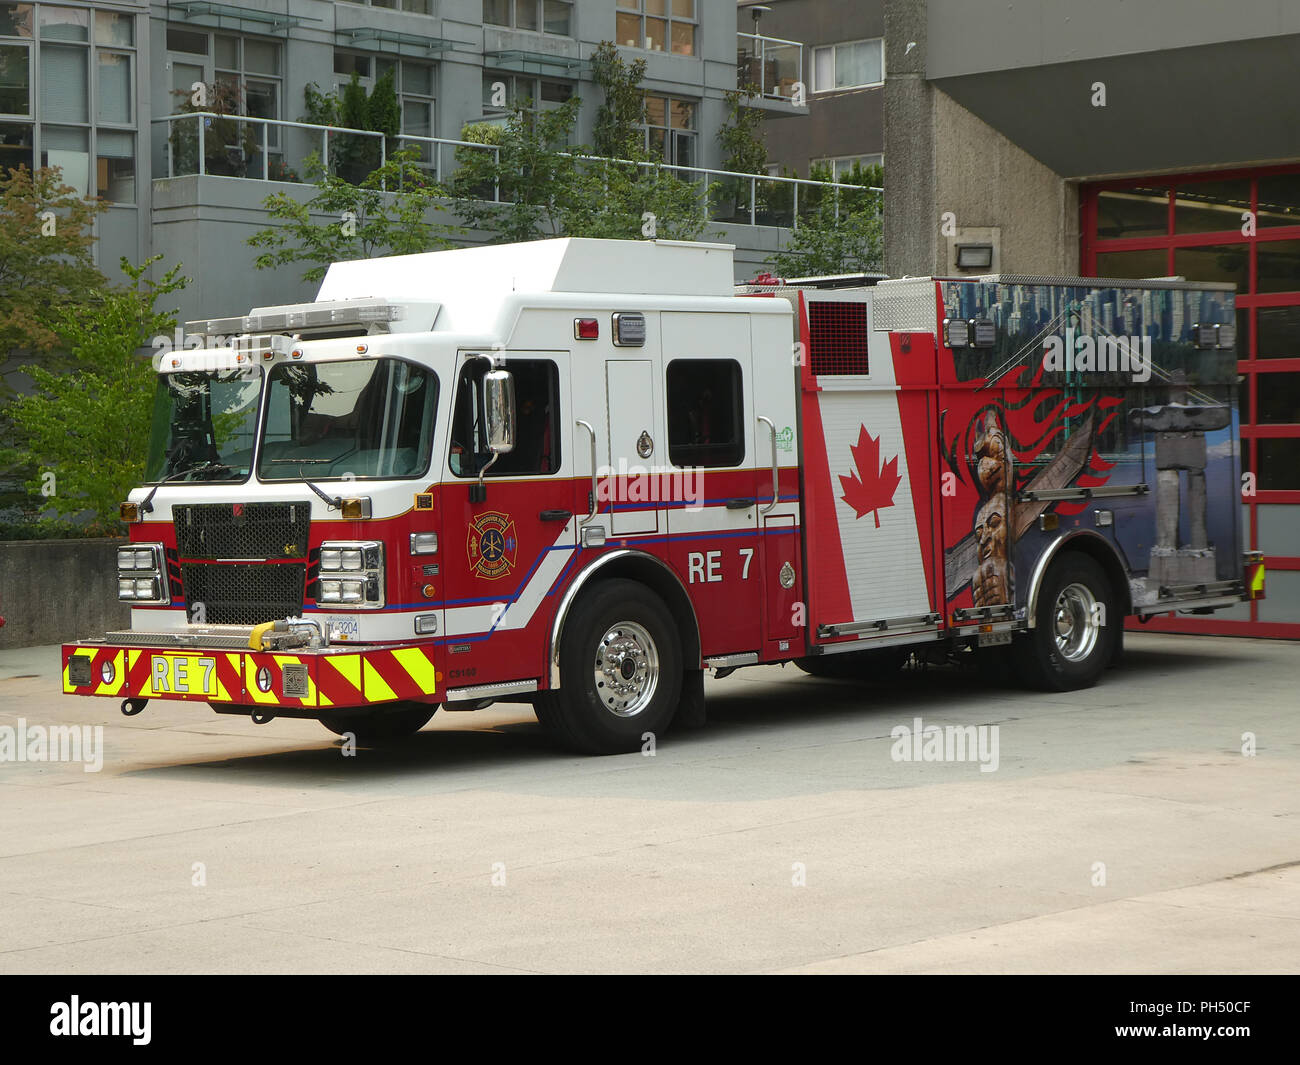 Smeal Fire appliance, Vancouver, Canada, 2018 Banque D'Images